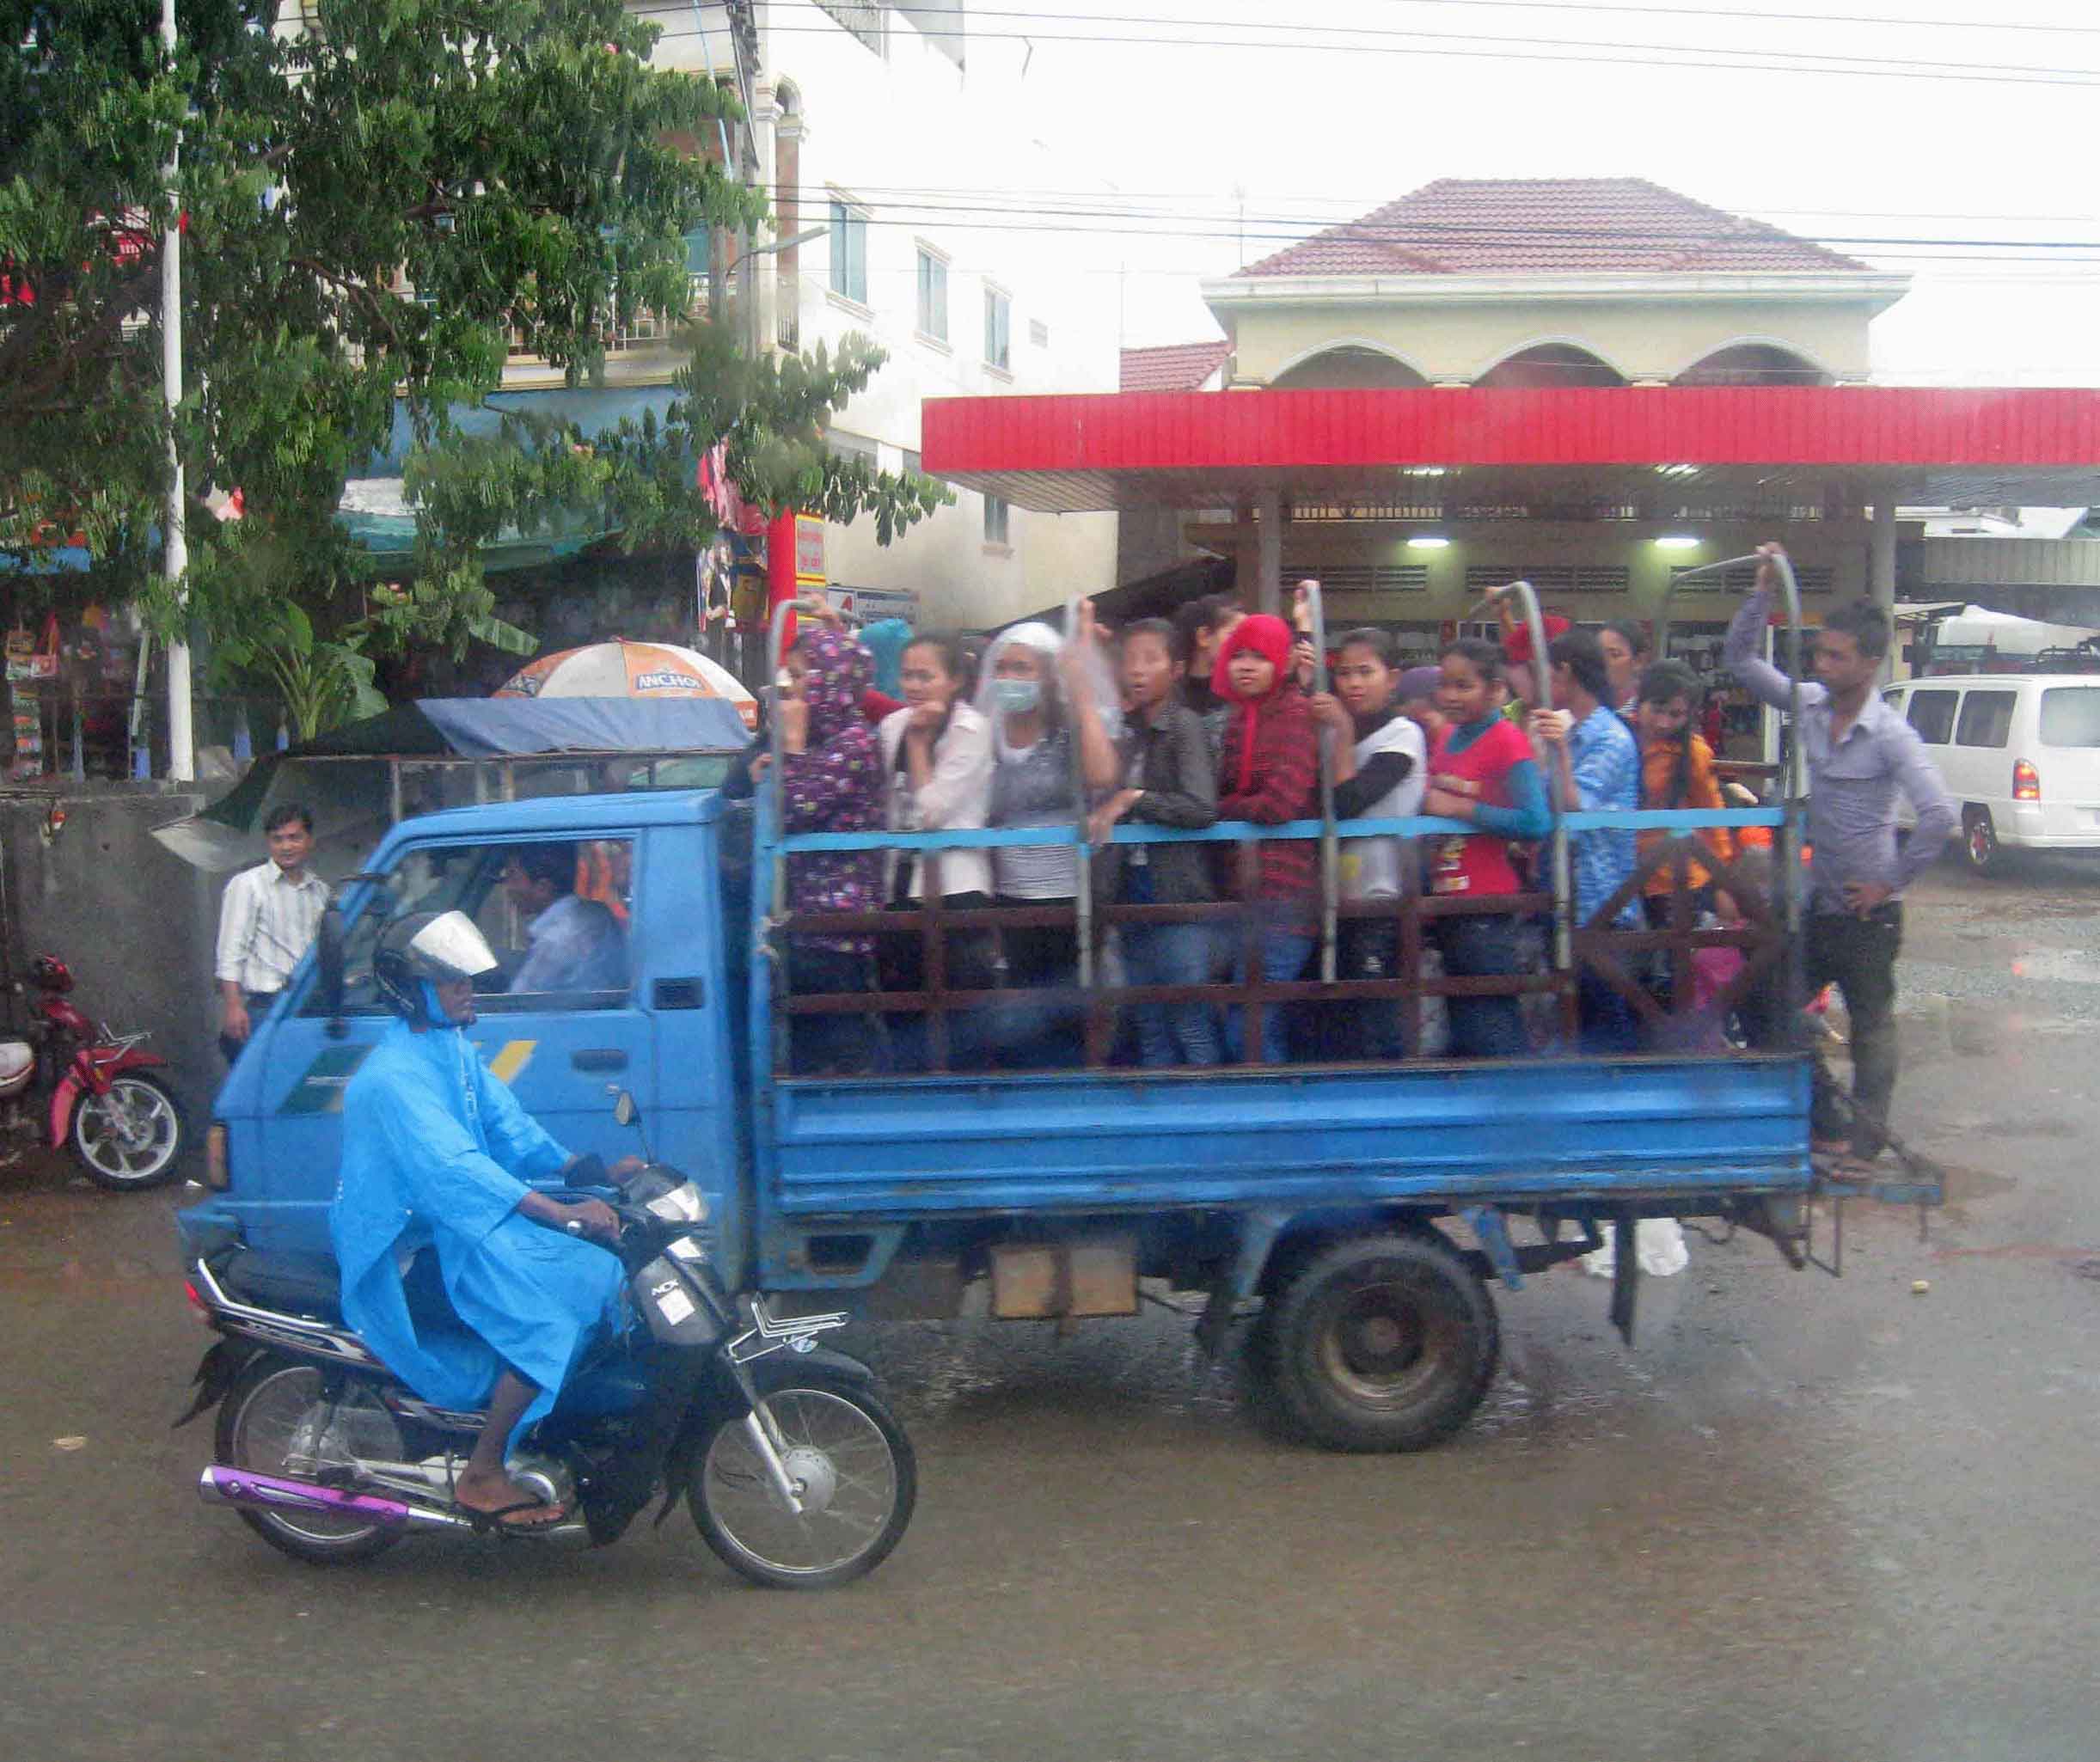 Workers from the Garment Factories on their way home 